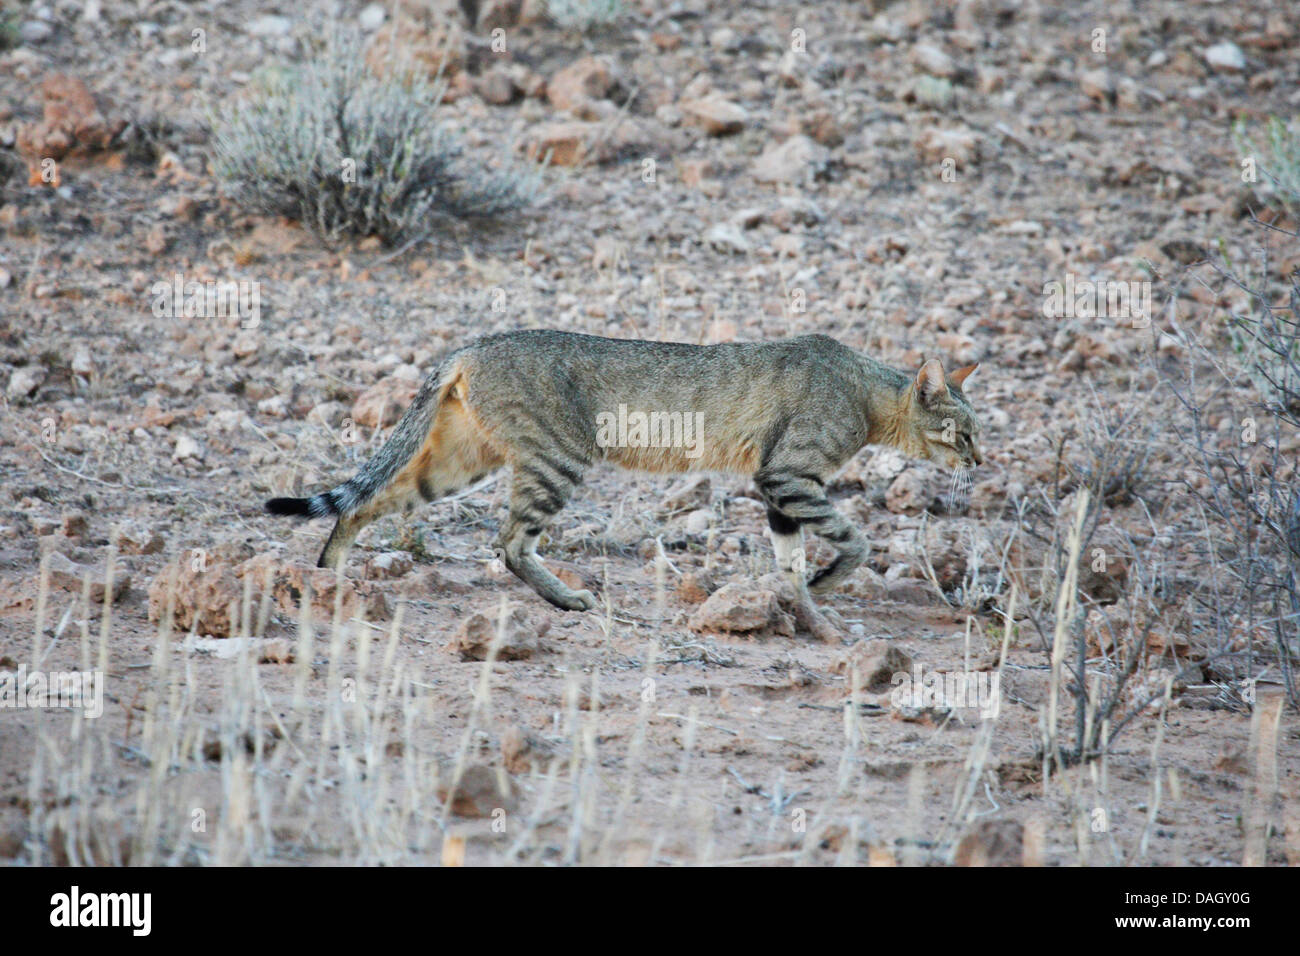 African wildcat (Felis lybica, Felis libyca, Felis silvestris lybica, Felis silvestris libyca), walking in the savannah well camouflaged, South Africa, Kgalagadi Transfrontier National Park Stock Photo